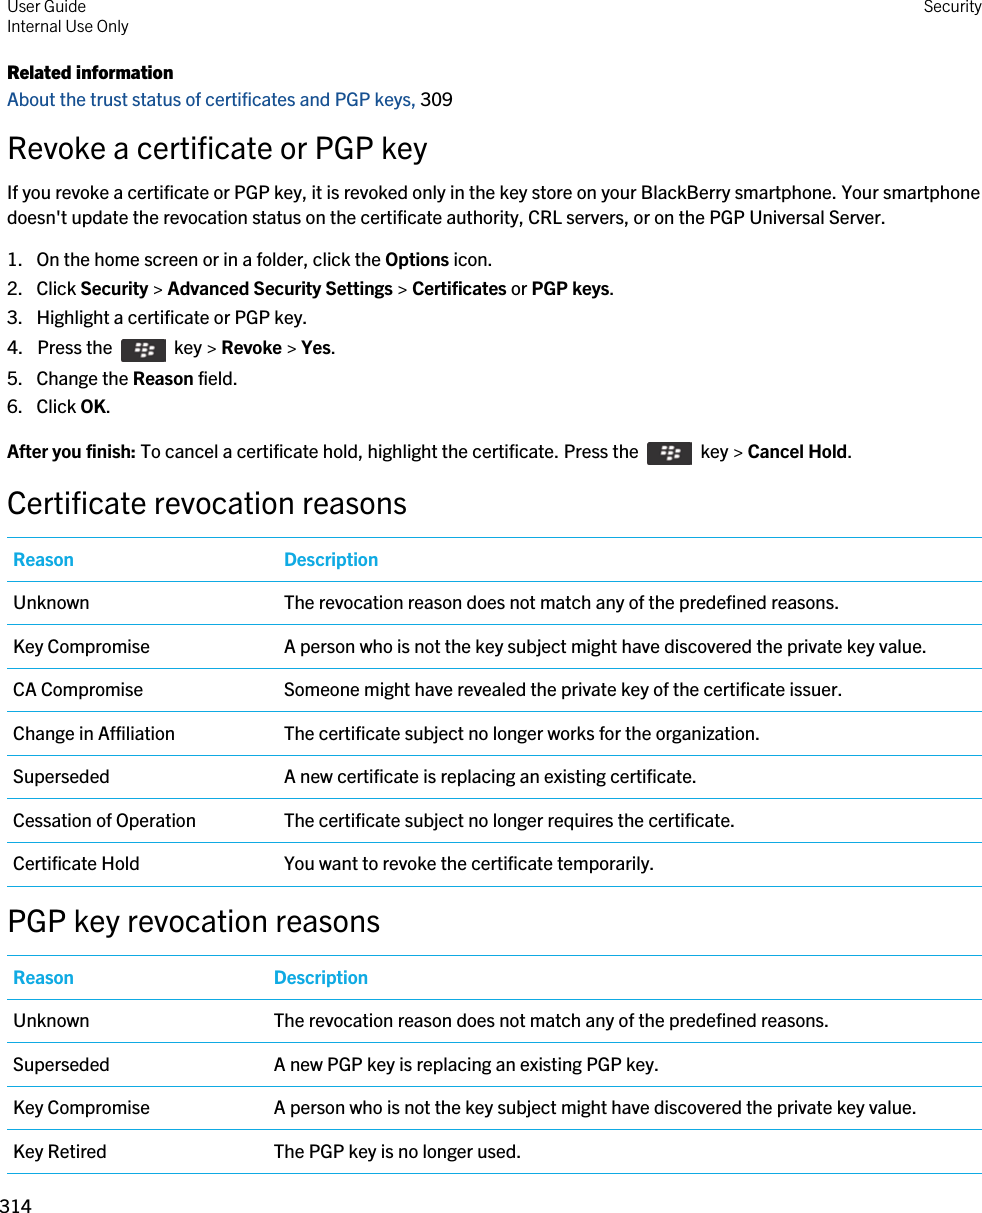 Related informationAbout the trust status of certificates and PGP keys, 309 Revoke a certificate or PGP keyIf you revoke a certificate or PGP key, it is revoked only in the key store on your BlackBerry smartphone. Your smartphone doesn&apos;t update the revocation status on the certificate authority, CRL servers, or on the PGP Universal Server.1. On the home screen or in a folder, click the Options icon.2. Click Security &gt; Advanced Security Settings &gt; Certificates or PGP keys.3. Highlight a certificate or PGP key.4.  Press the    key &gt; Revoke &gt; Yes. 5. Change the Reason field.6. Click OK.After you finish: To cancel a certificate hold, highlight the certificate. Press the    key &gt; Cancel Hold.Certificate revocation reasonsReason DescriptionUnknown The revocation reason does not match any of the predefined reasons.Key Compromise A person who is not the key subject might have discovered the private key value.CA Compromise Someone might have revealed the private key of the certificate issuer.Change in Affiliation The certificate subject no longer works for the organization.Superseded A new certificate is replacing an existing certificate.Cessation of Operation The certificate subject no longer requires the certificate.Certificate Hold You want to revoke the certificate temporarily.PGP key revocation reasonsReason DescriptionUnknown The revocation reason does not match any of the predefined reasons.Superseded A new PGP key is replacing an existing PGP key.Key Compromise A person who is not the key subject might have discovered the private key value.Key Retired The PGP key is no longer used.User GuideInternal Use Only Security314 